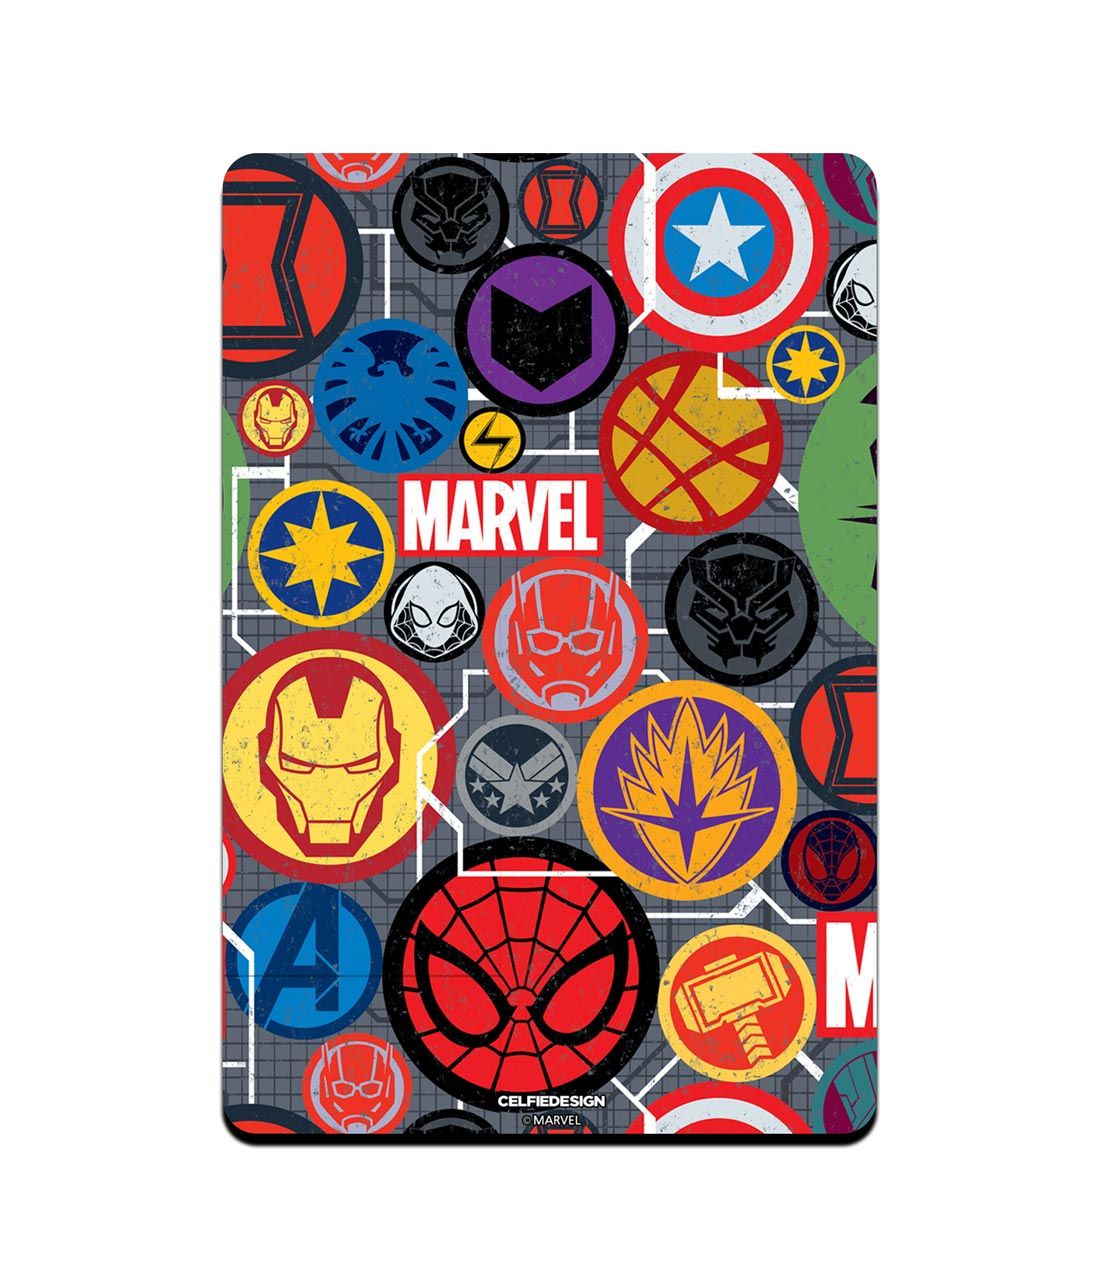 Buy Marvel Comics Collection Macmerise Glass Case for iPhone 12